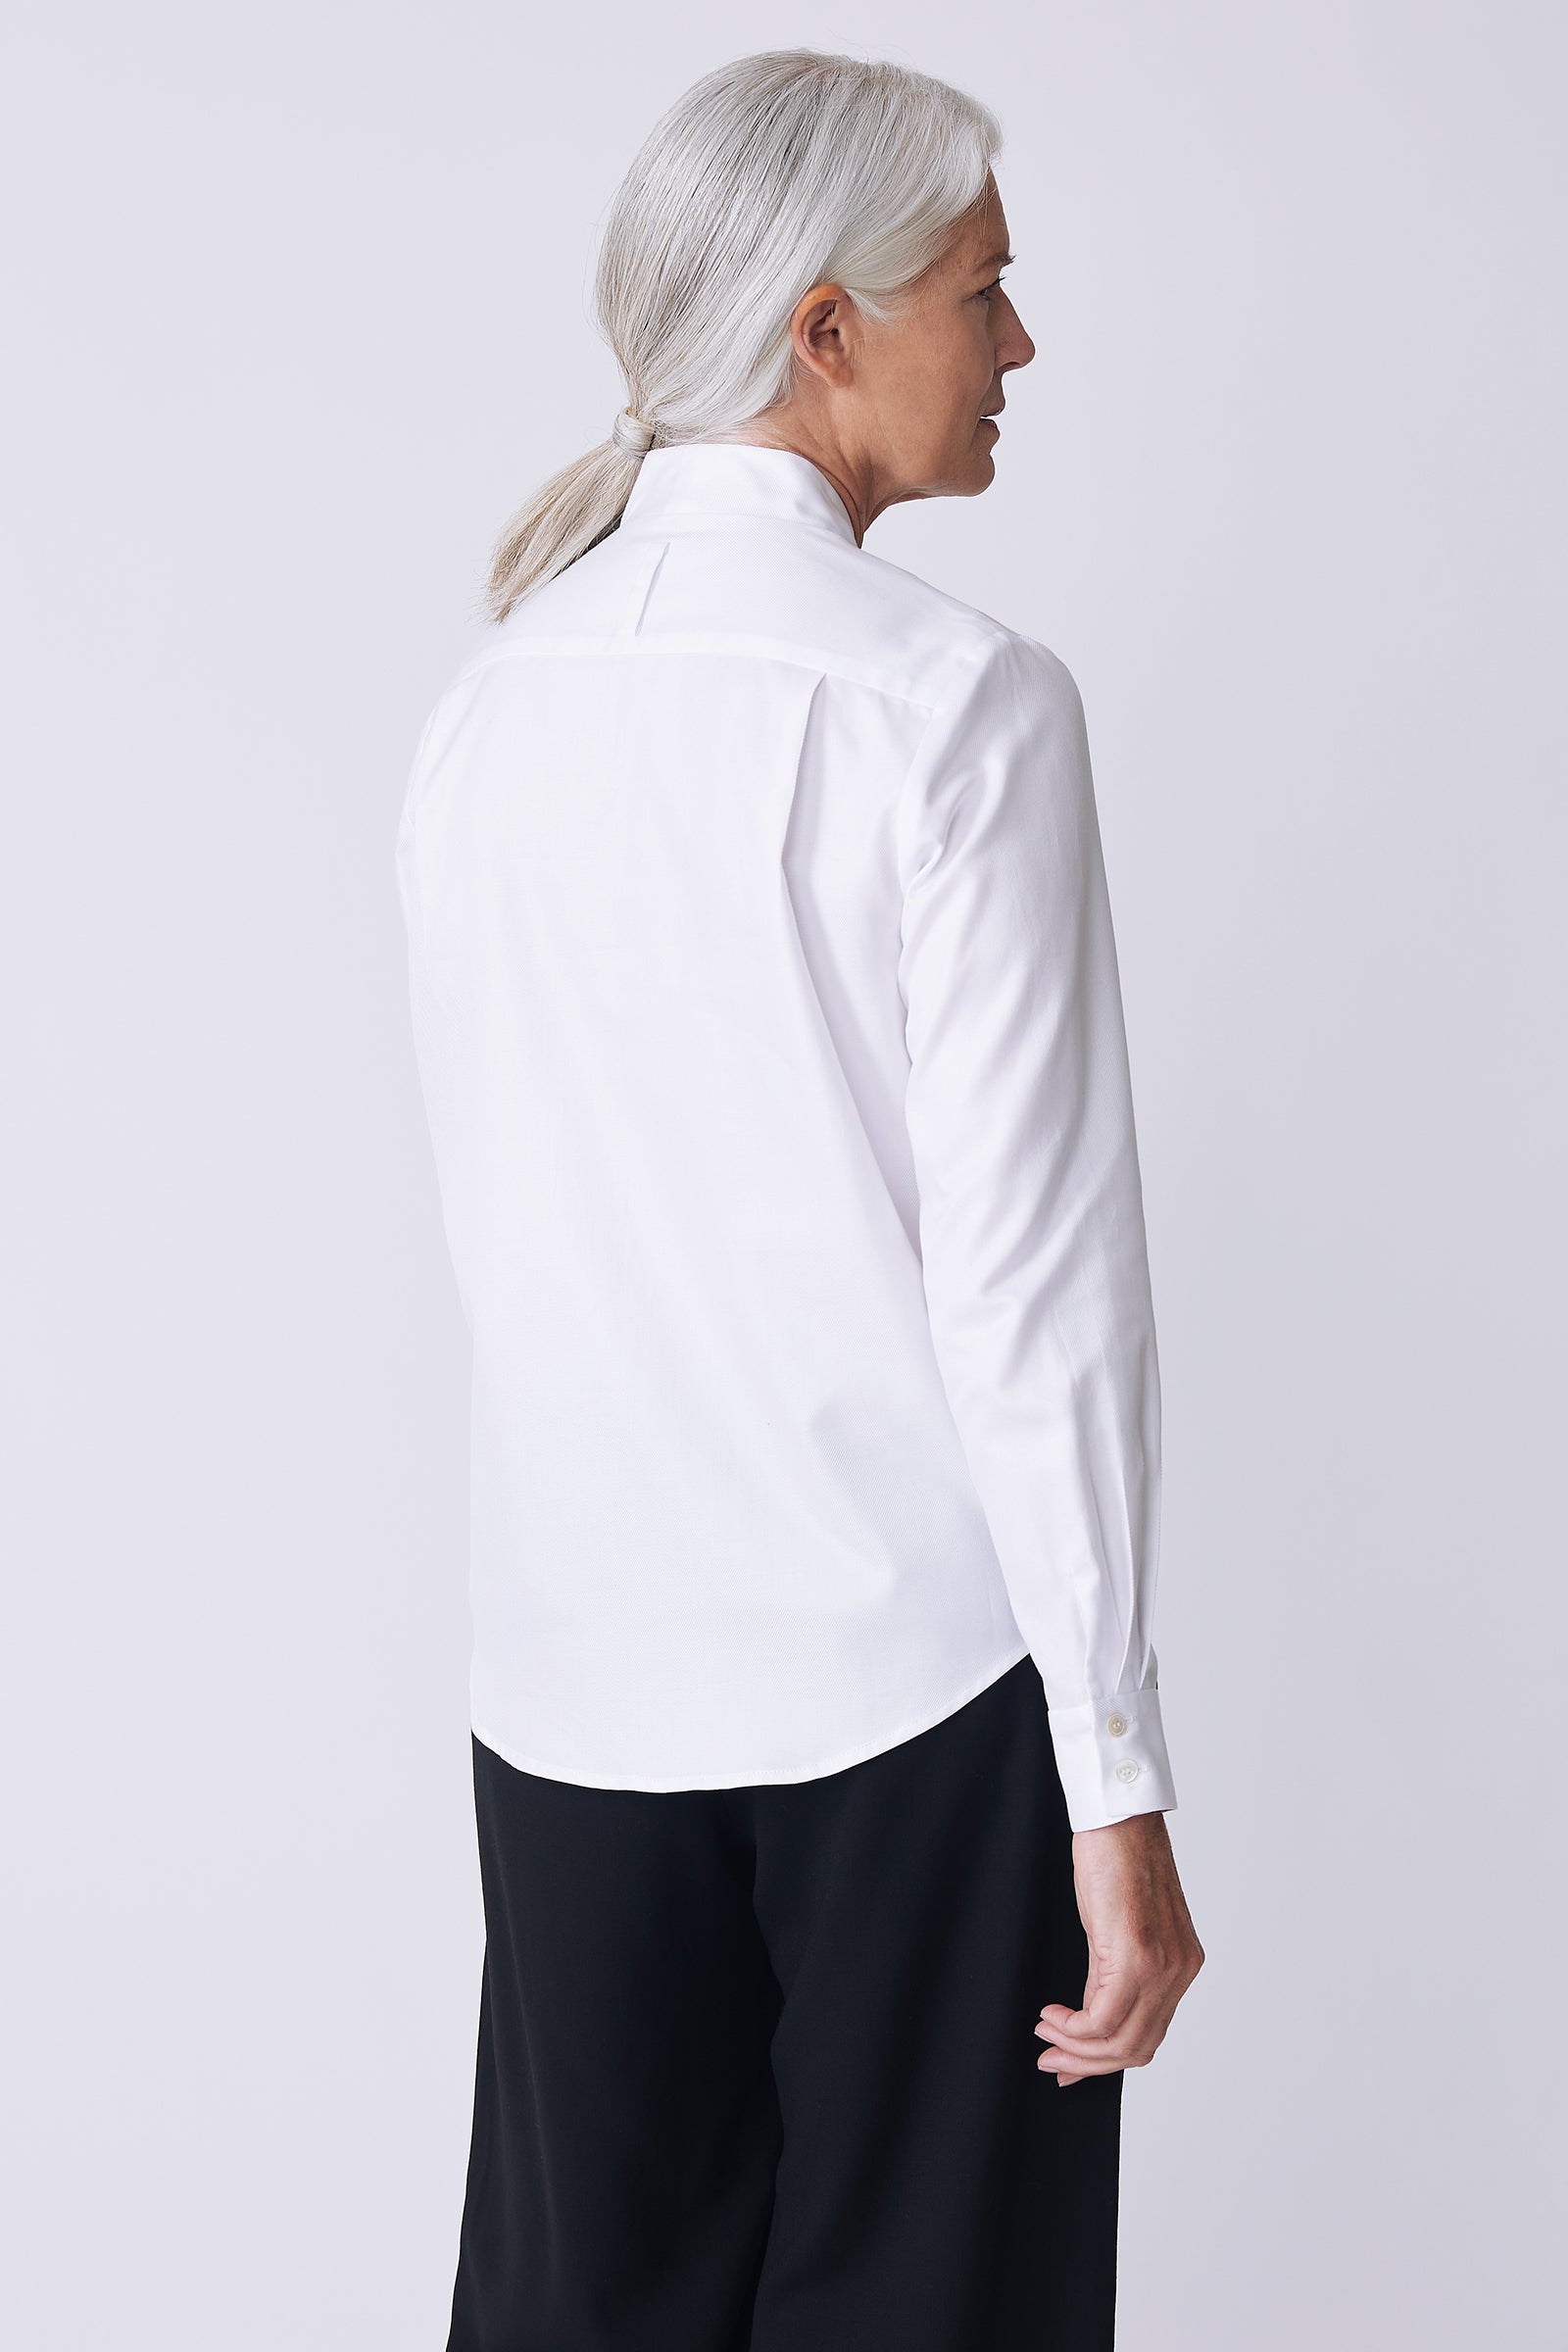 Kal Rieman Nadia Blouse in soft twill white on model front view holding cuff